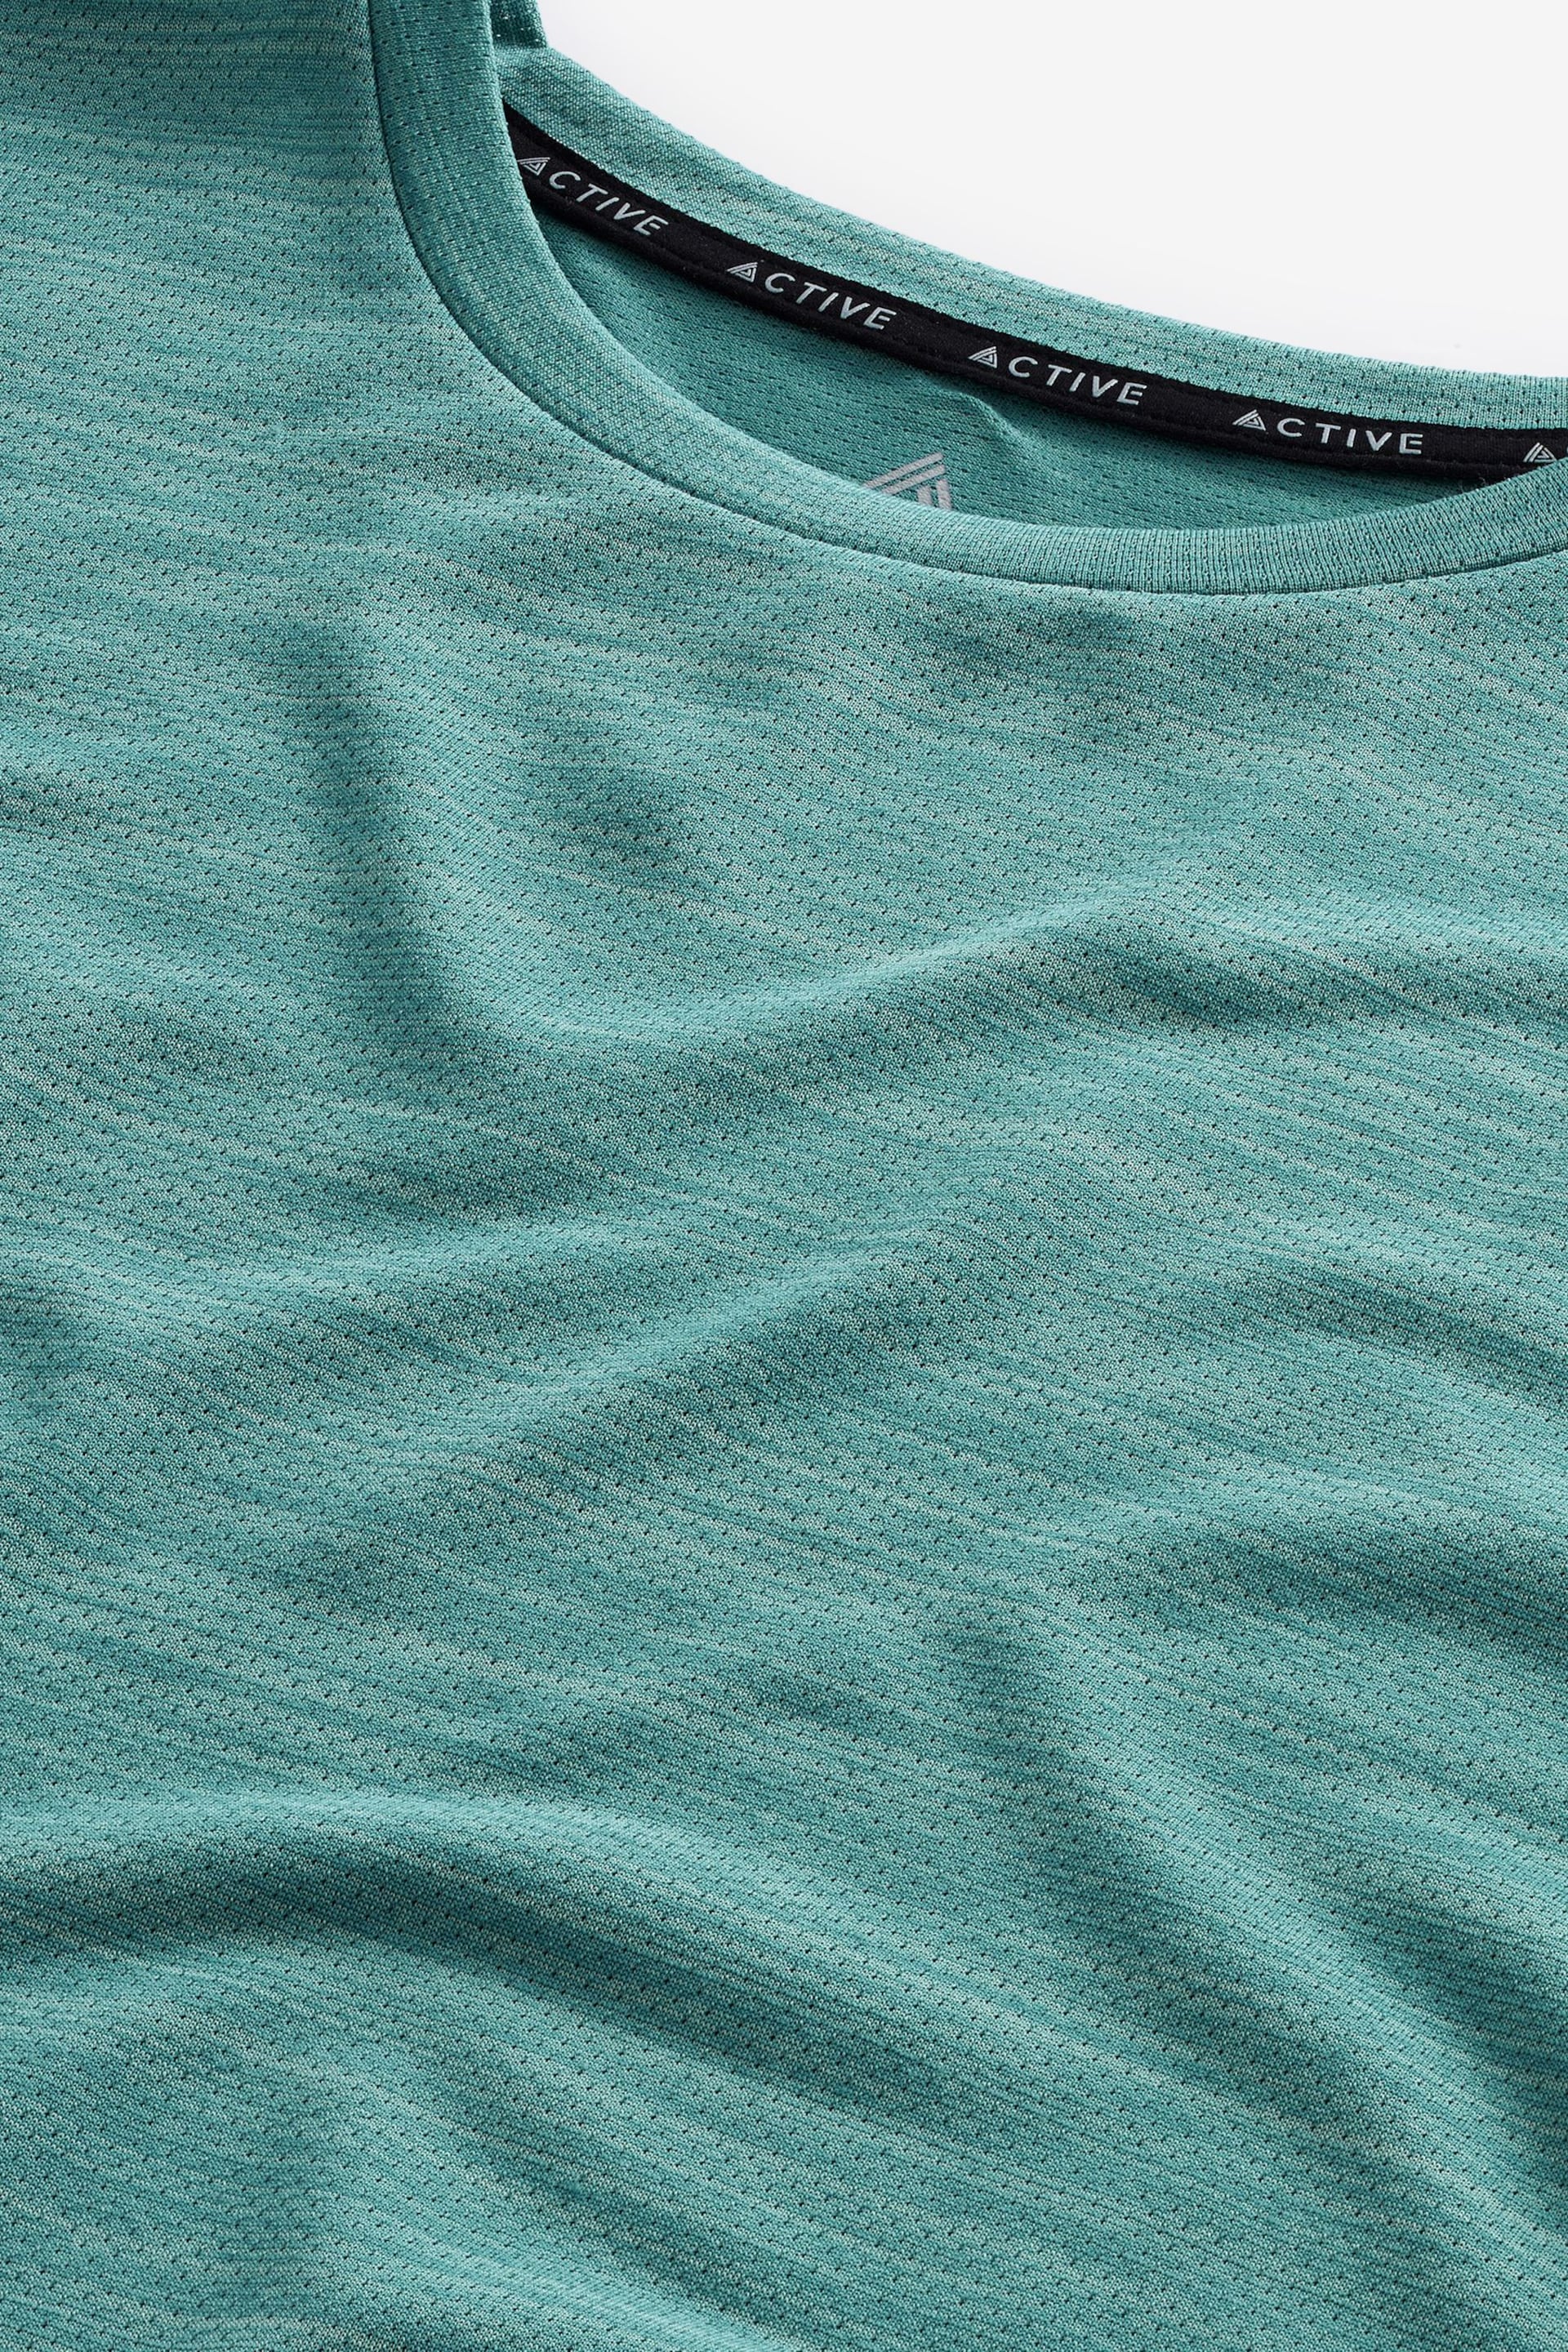 Teal Blue Active Mesh Training T-Shirt - Image 7 of 8